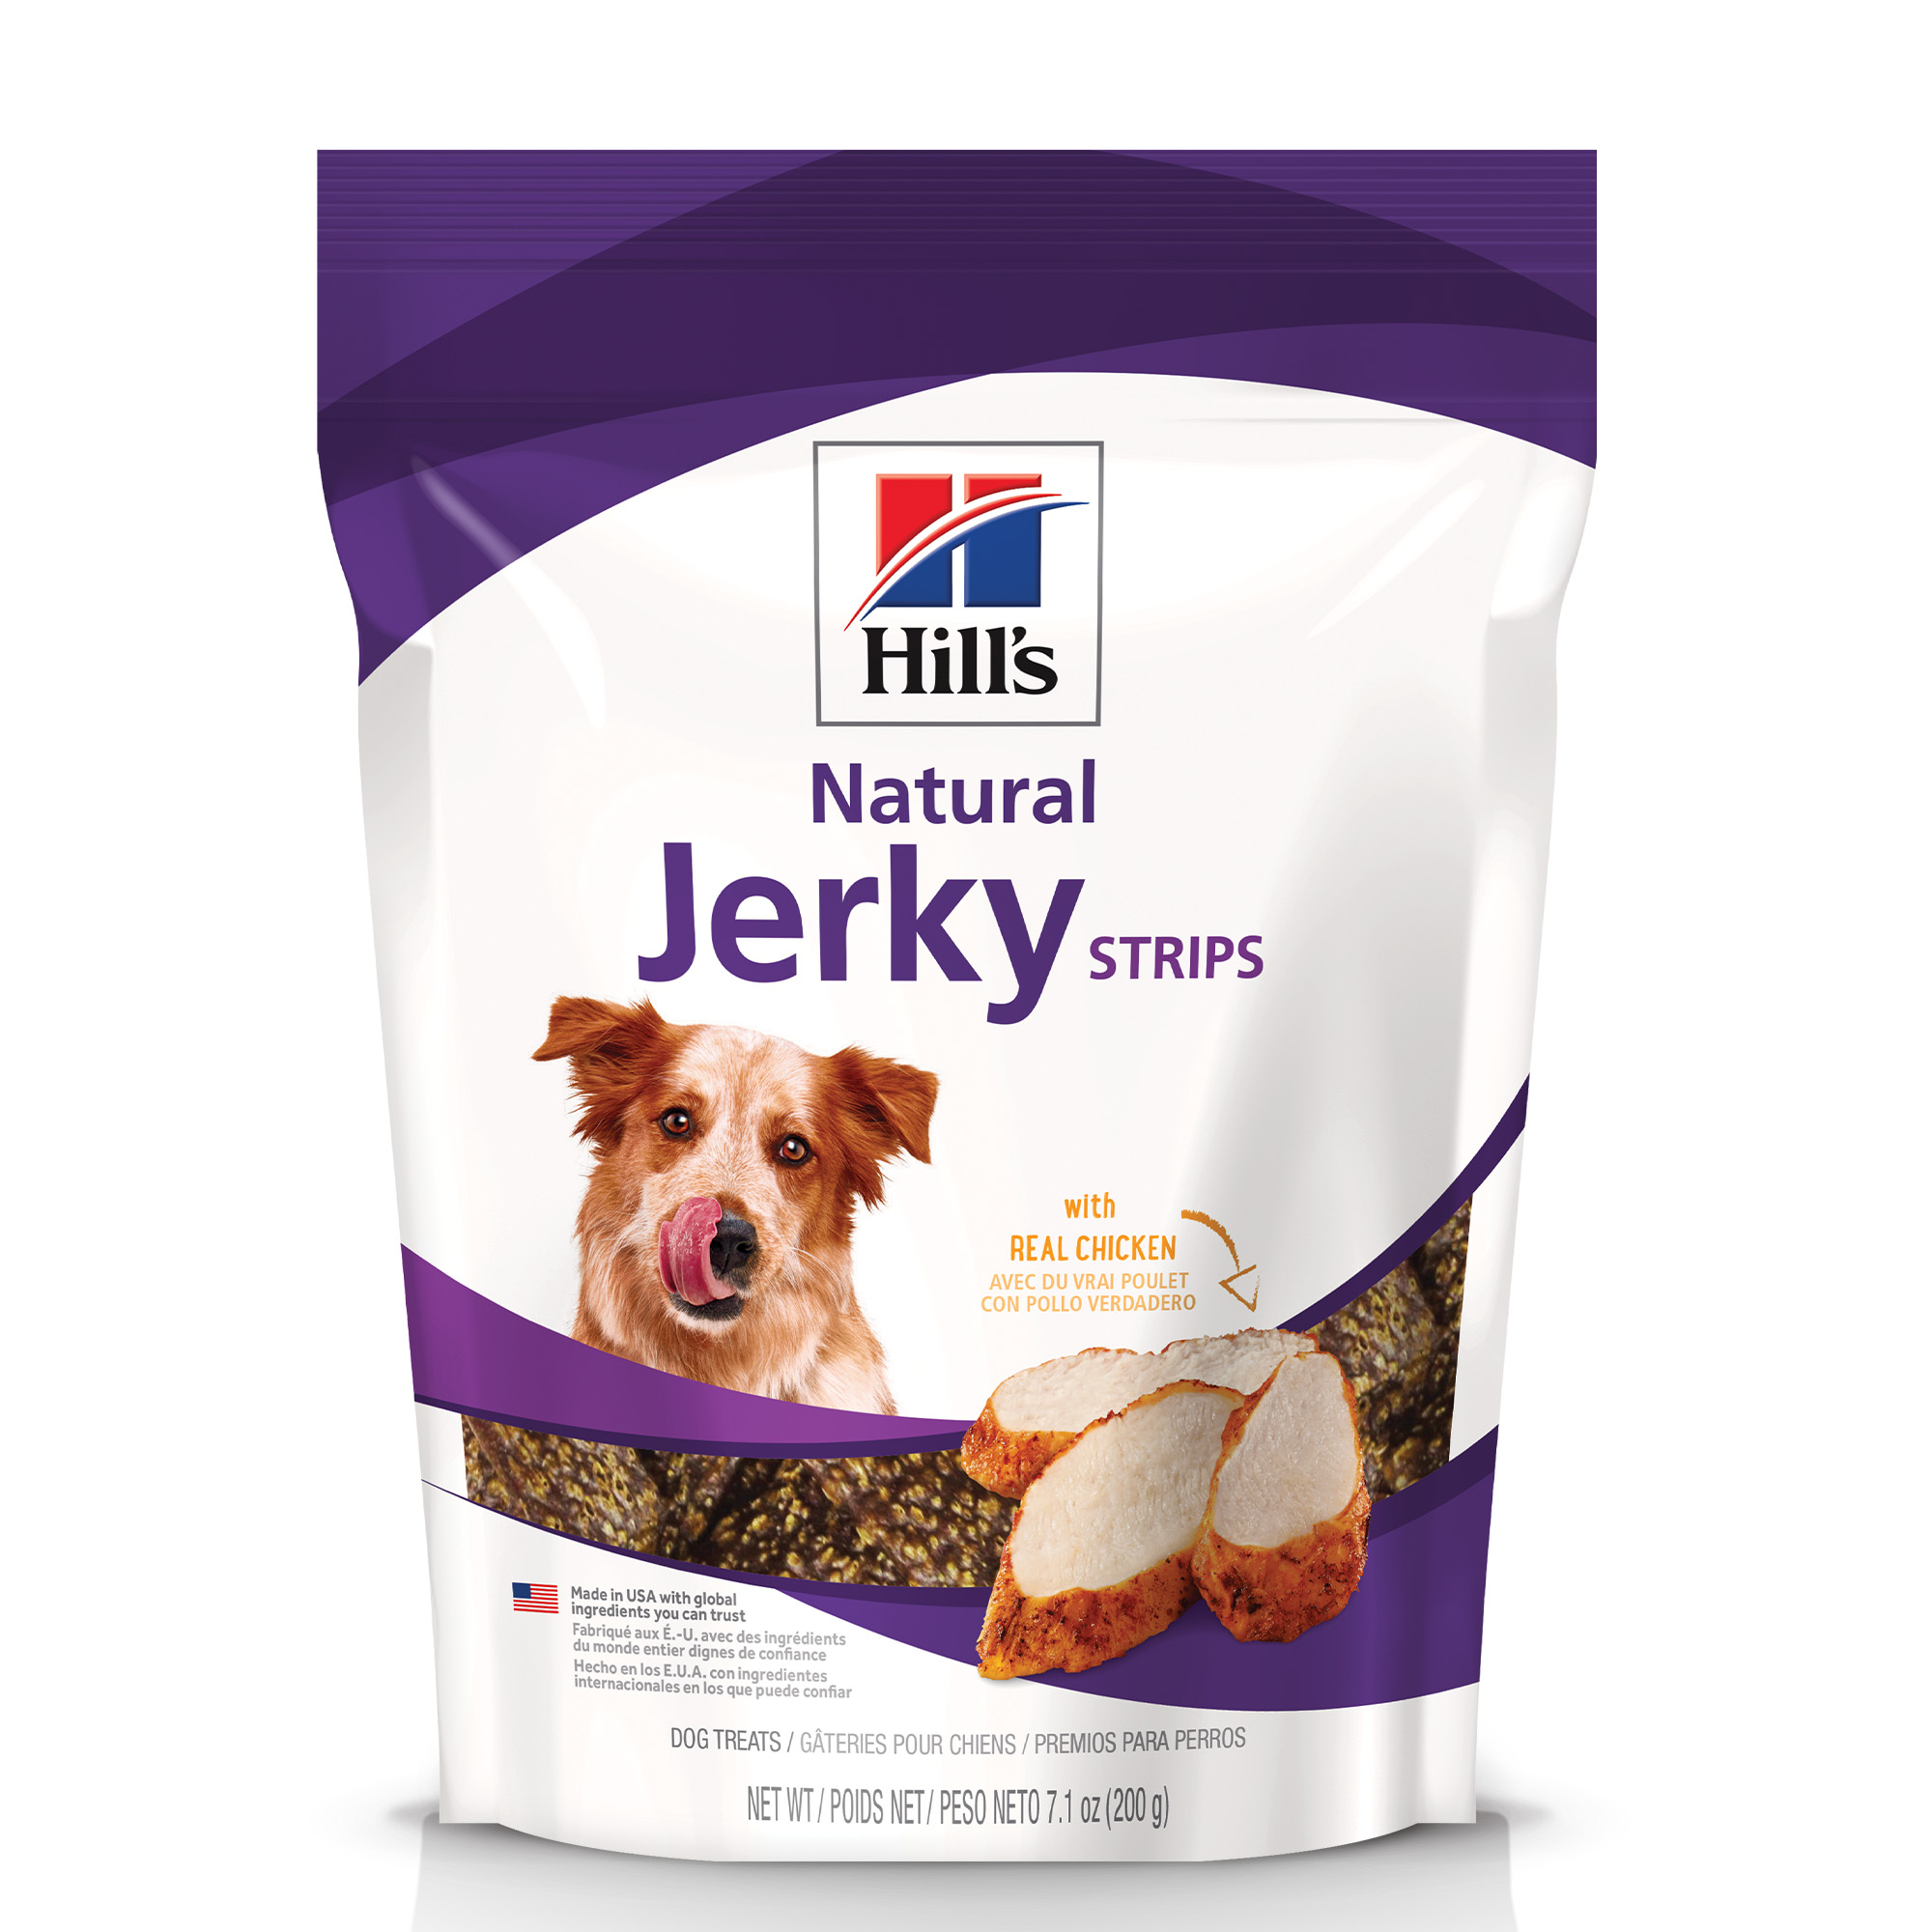 Hill's Natural Jerky Strips Dog Treats with Real Chicken 7.1oz